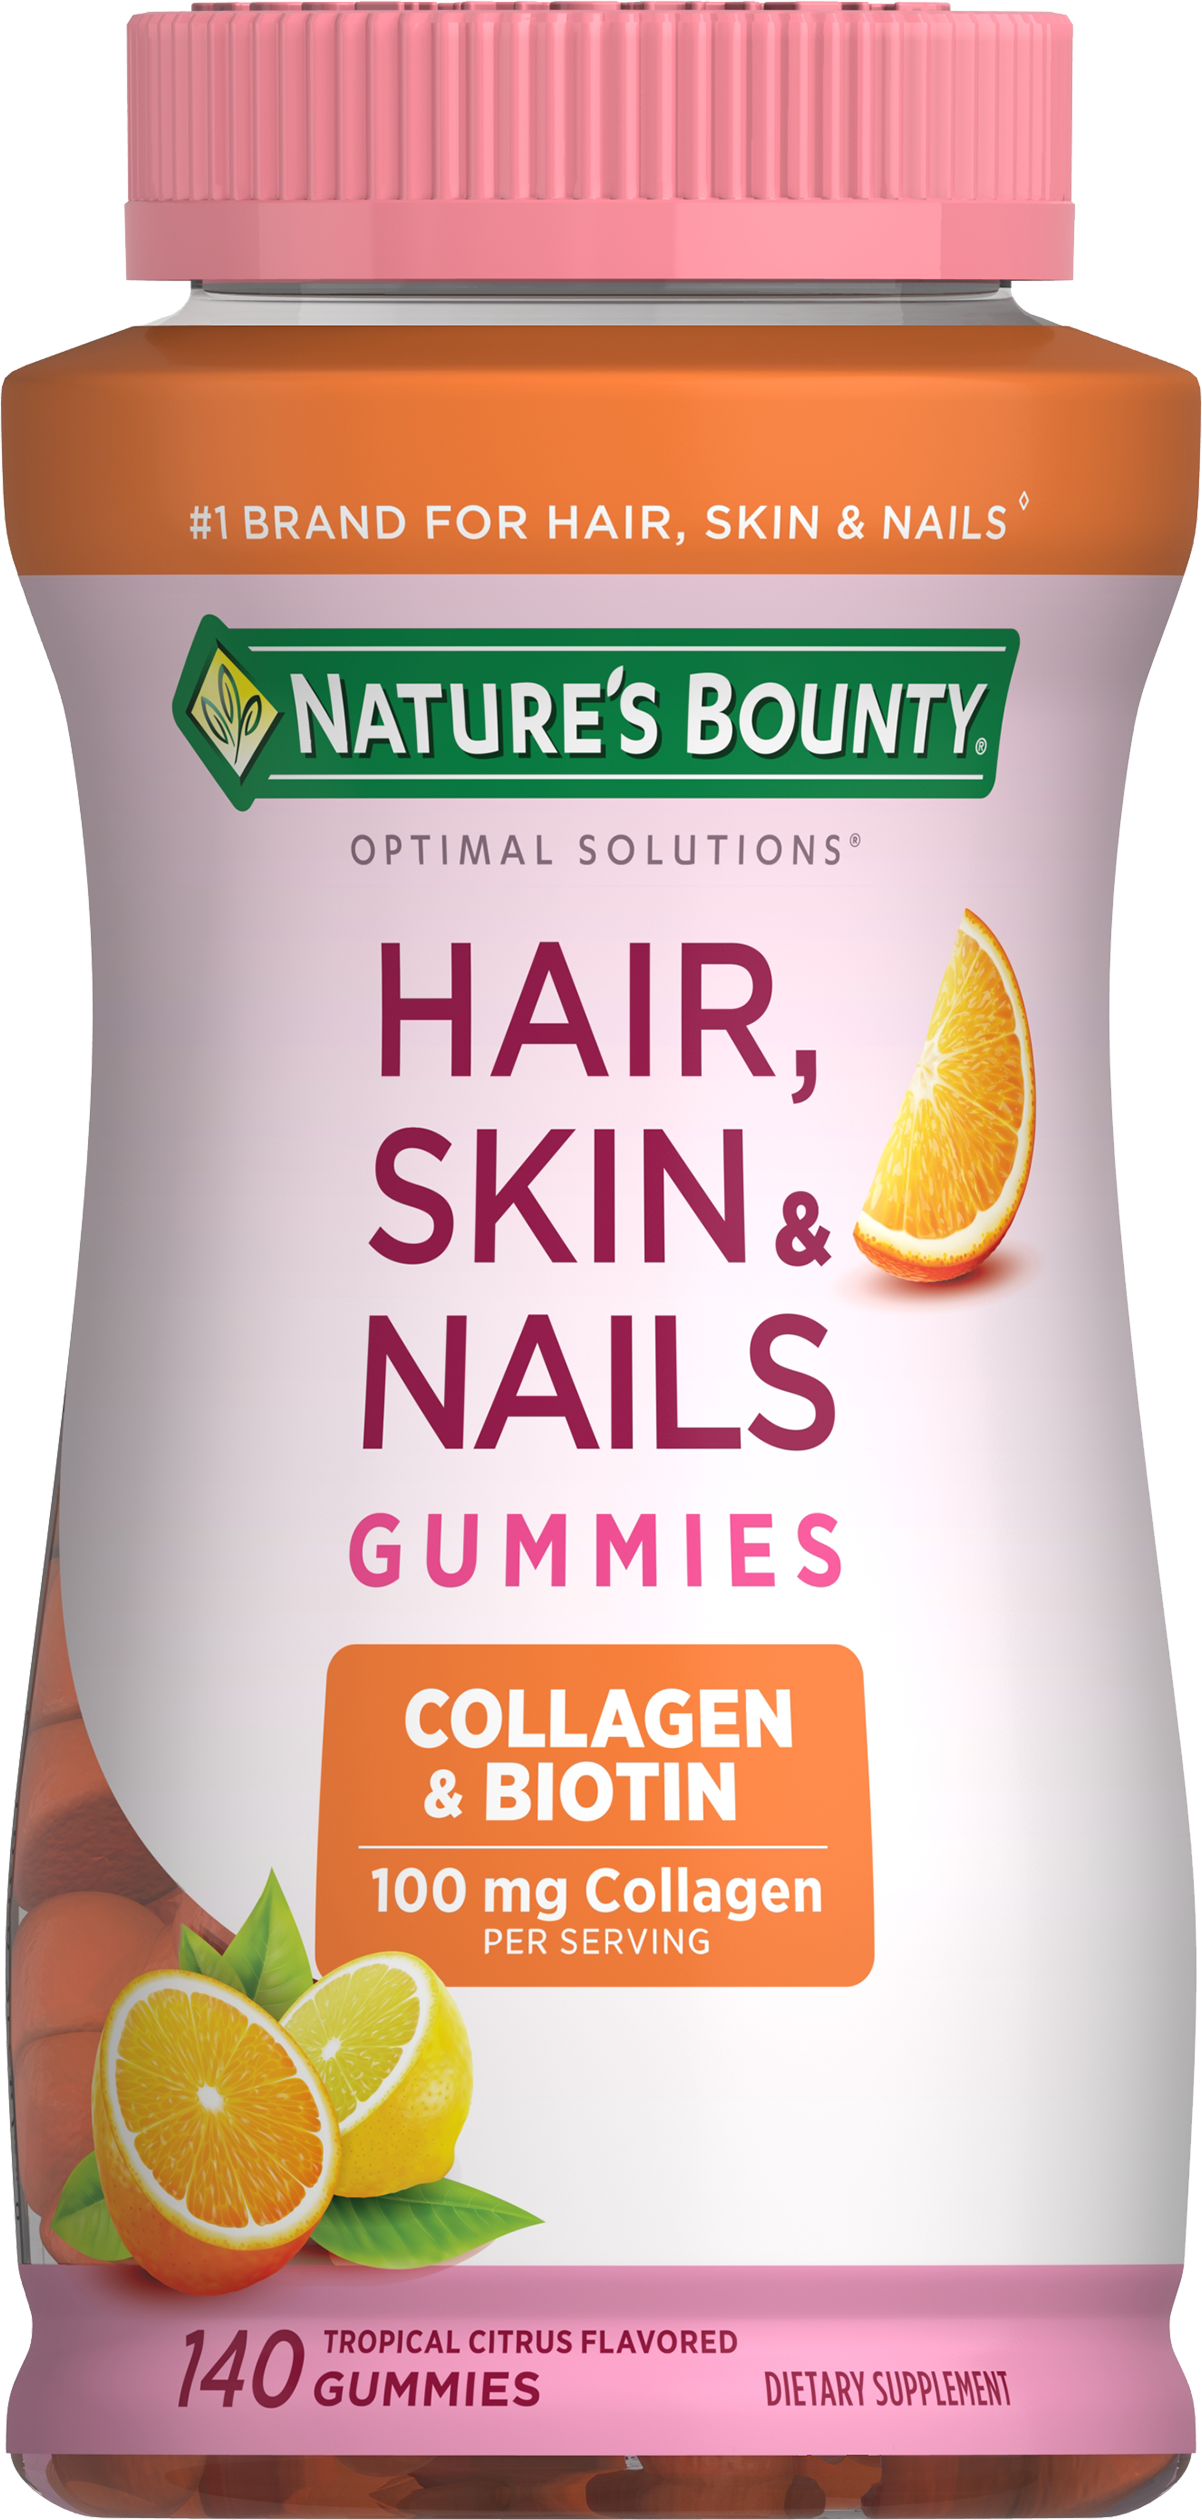 Nature's Bounty Hair, Skin & Nails Extra Strenght 250 softgels Price in  India - Buy Nature's Bounty Hair, Skin & Nails Extra Strenght 250 softgels  online at Flipkart.com